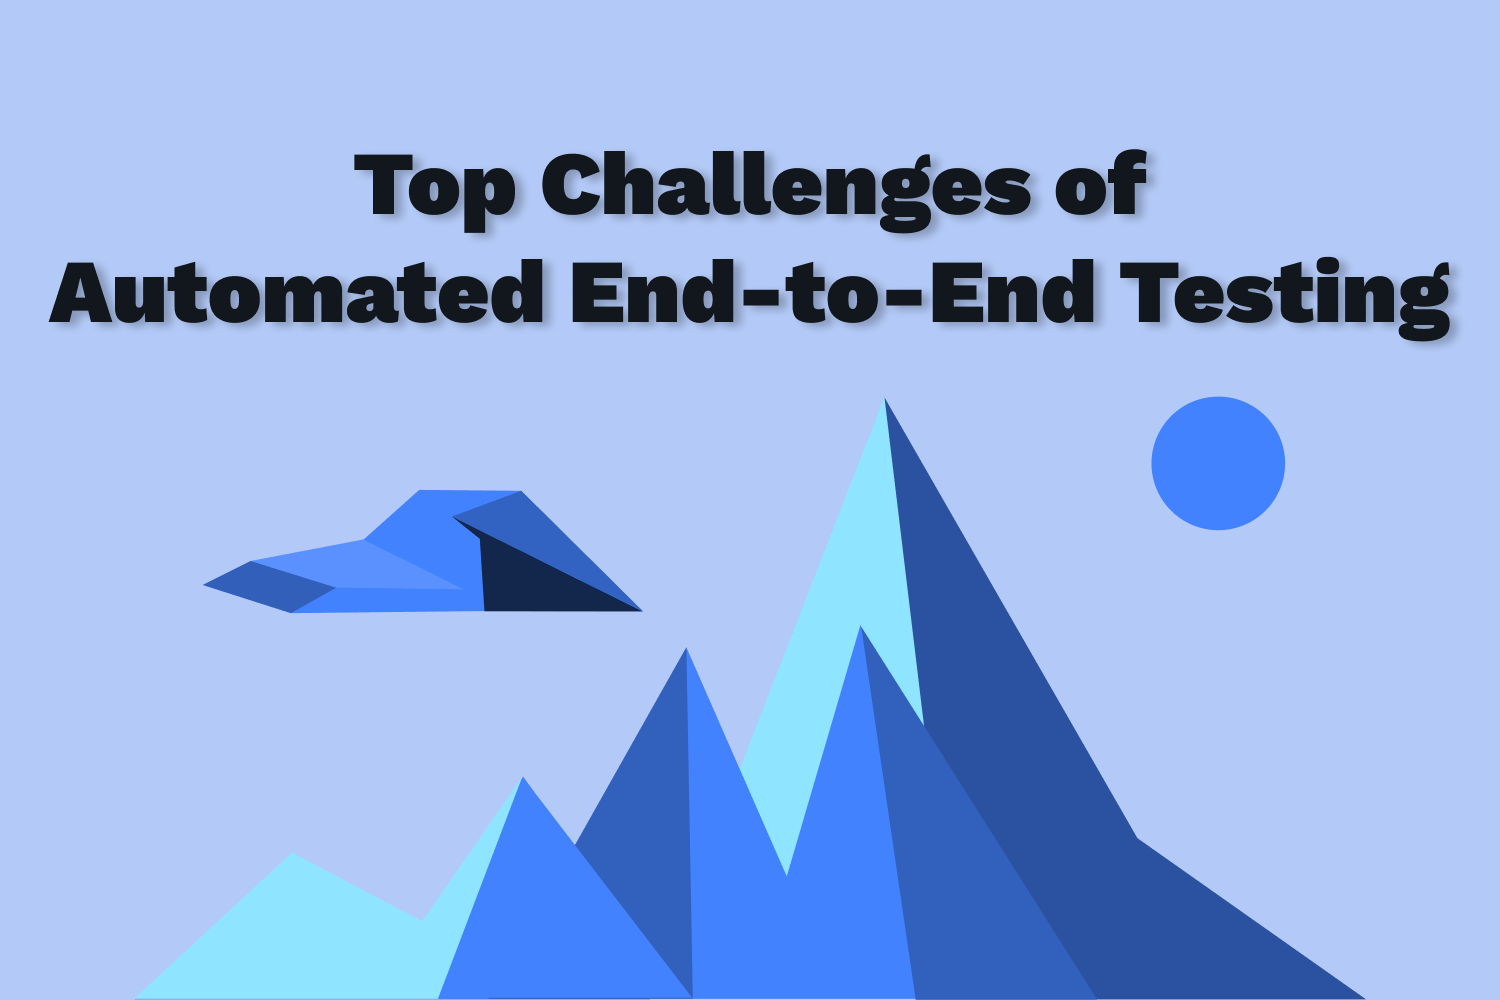 Top Challenges of Automated End-to-End Testing